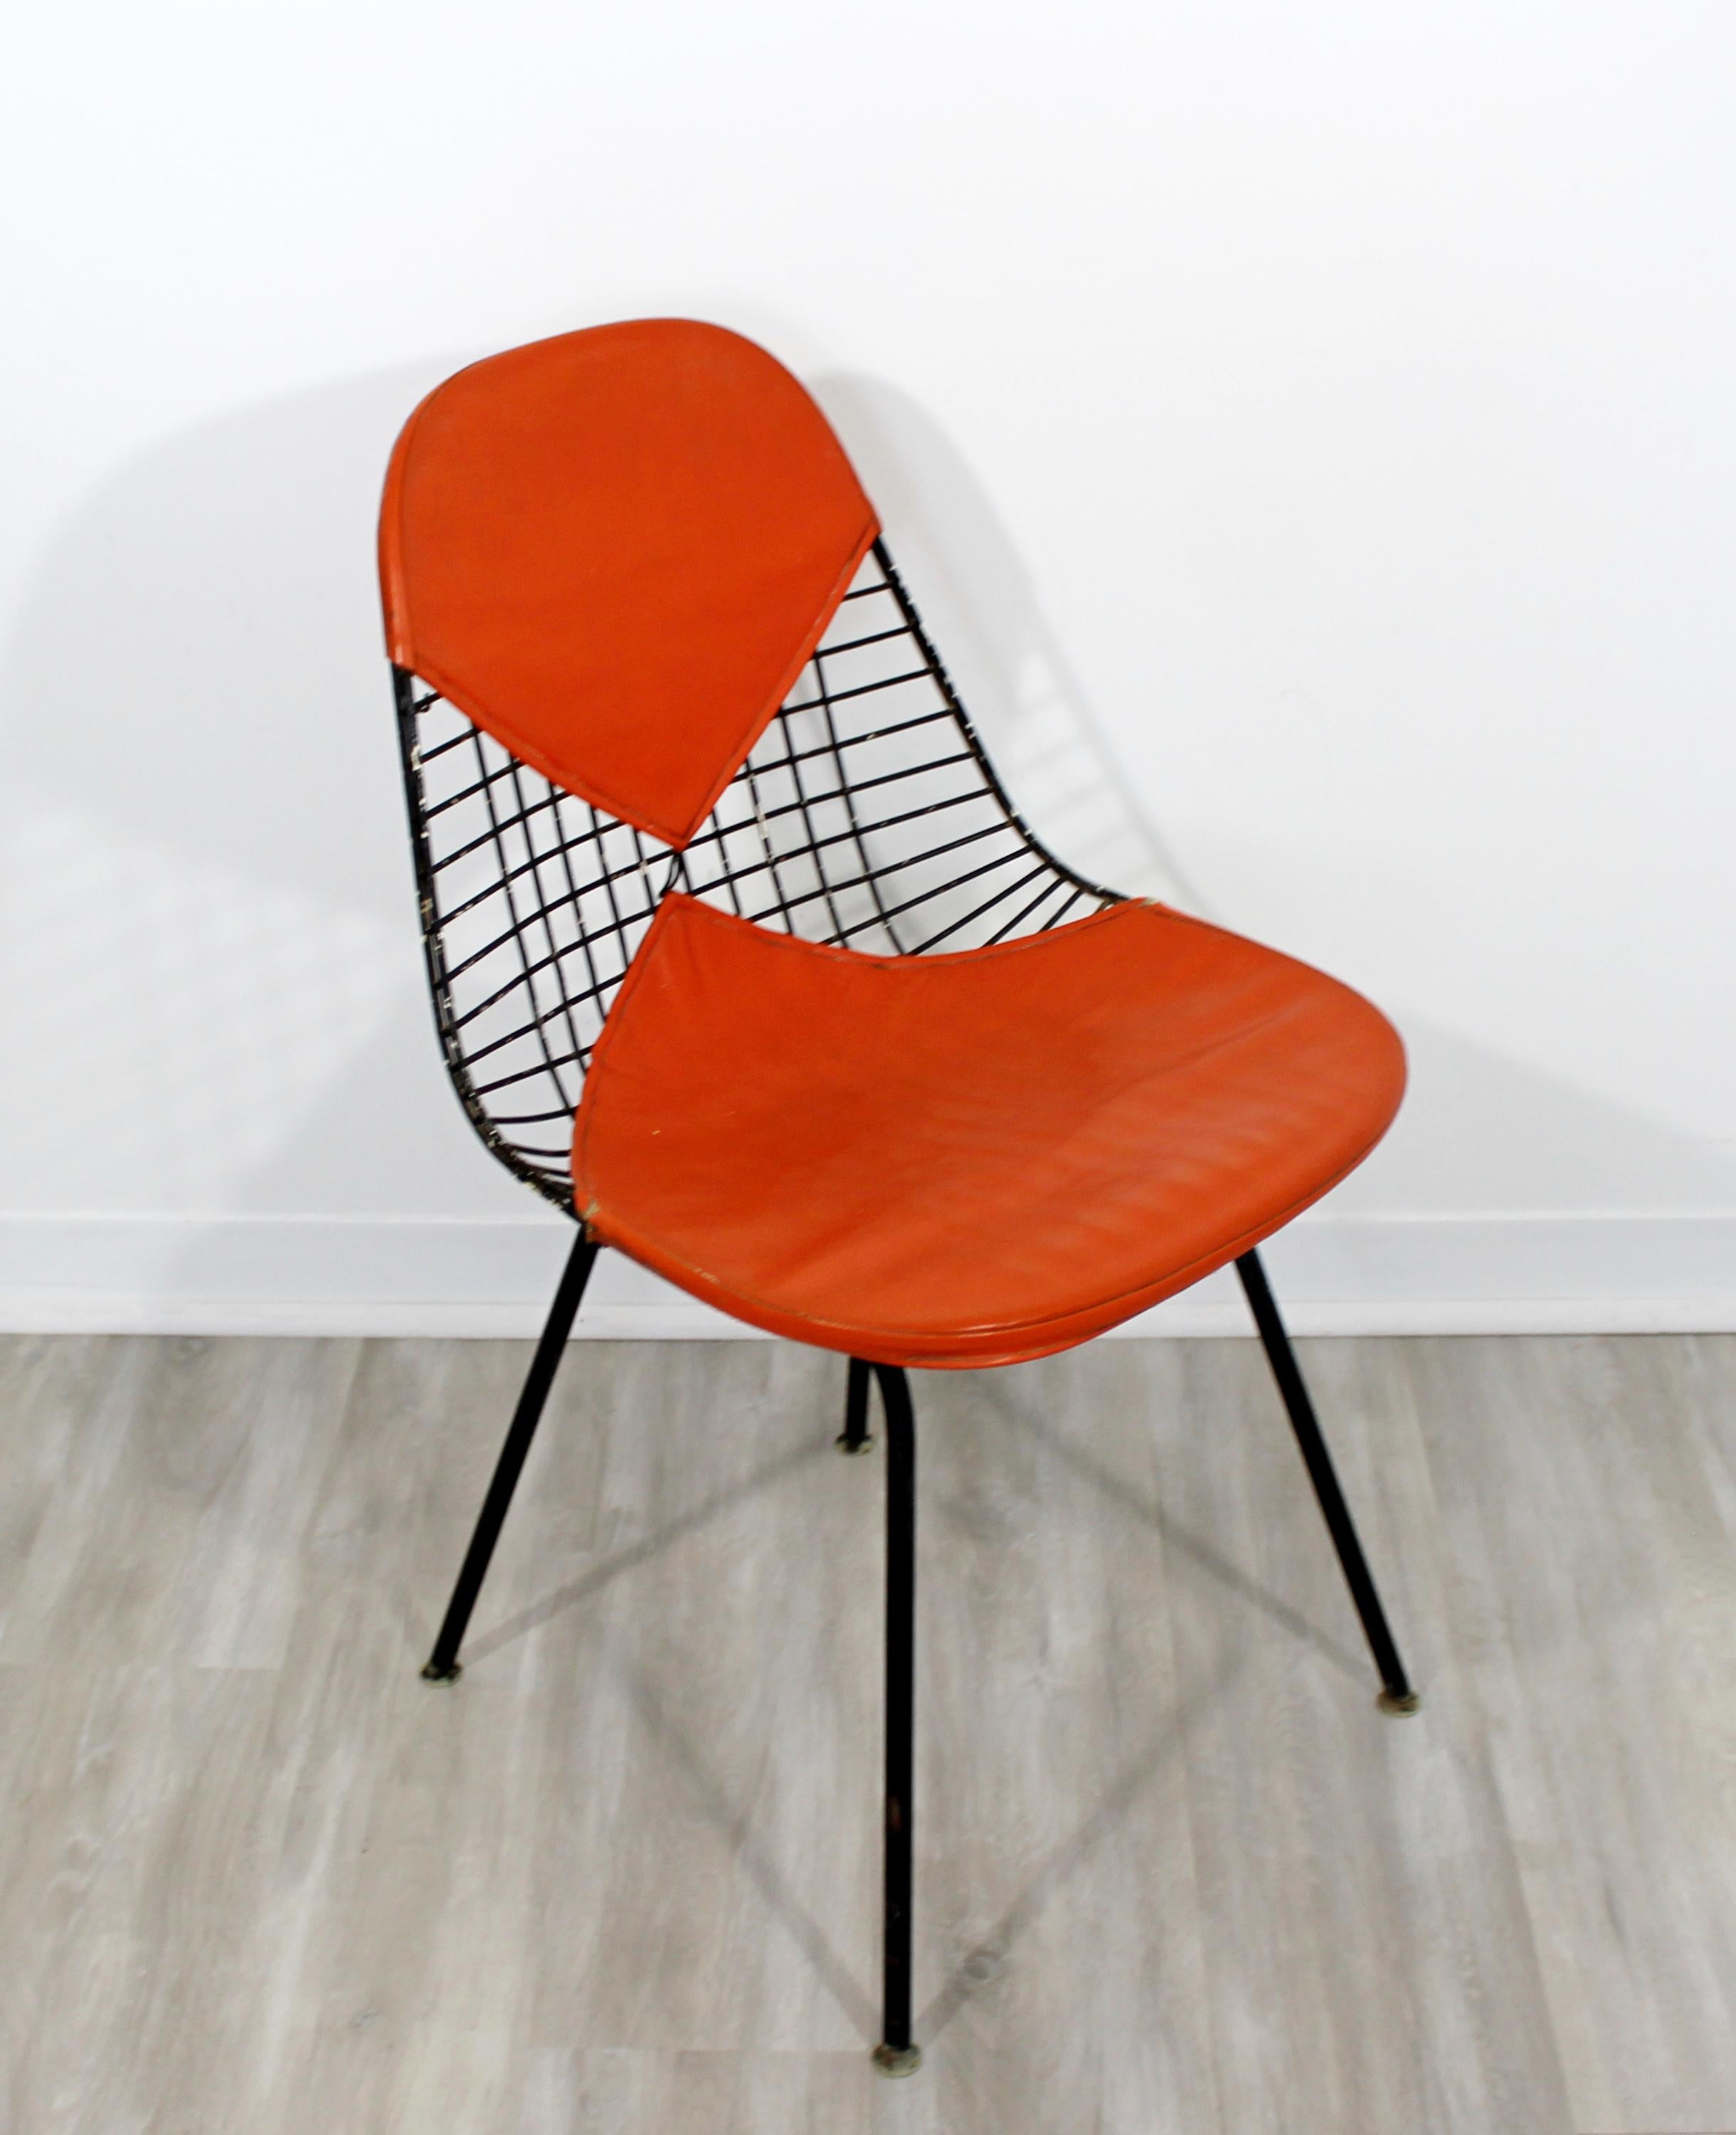 For your consideration is an original, iron, Bikini side chair, by Charles Eames for Herman Miller, circa the 1960s. In vintage condition. The dimensions are 19